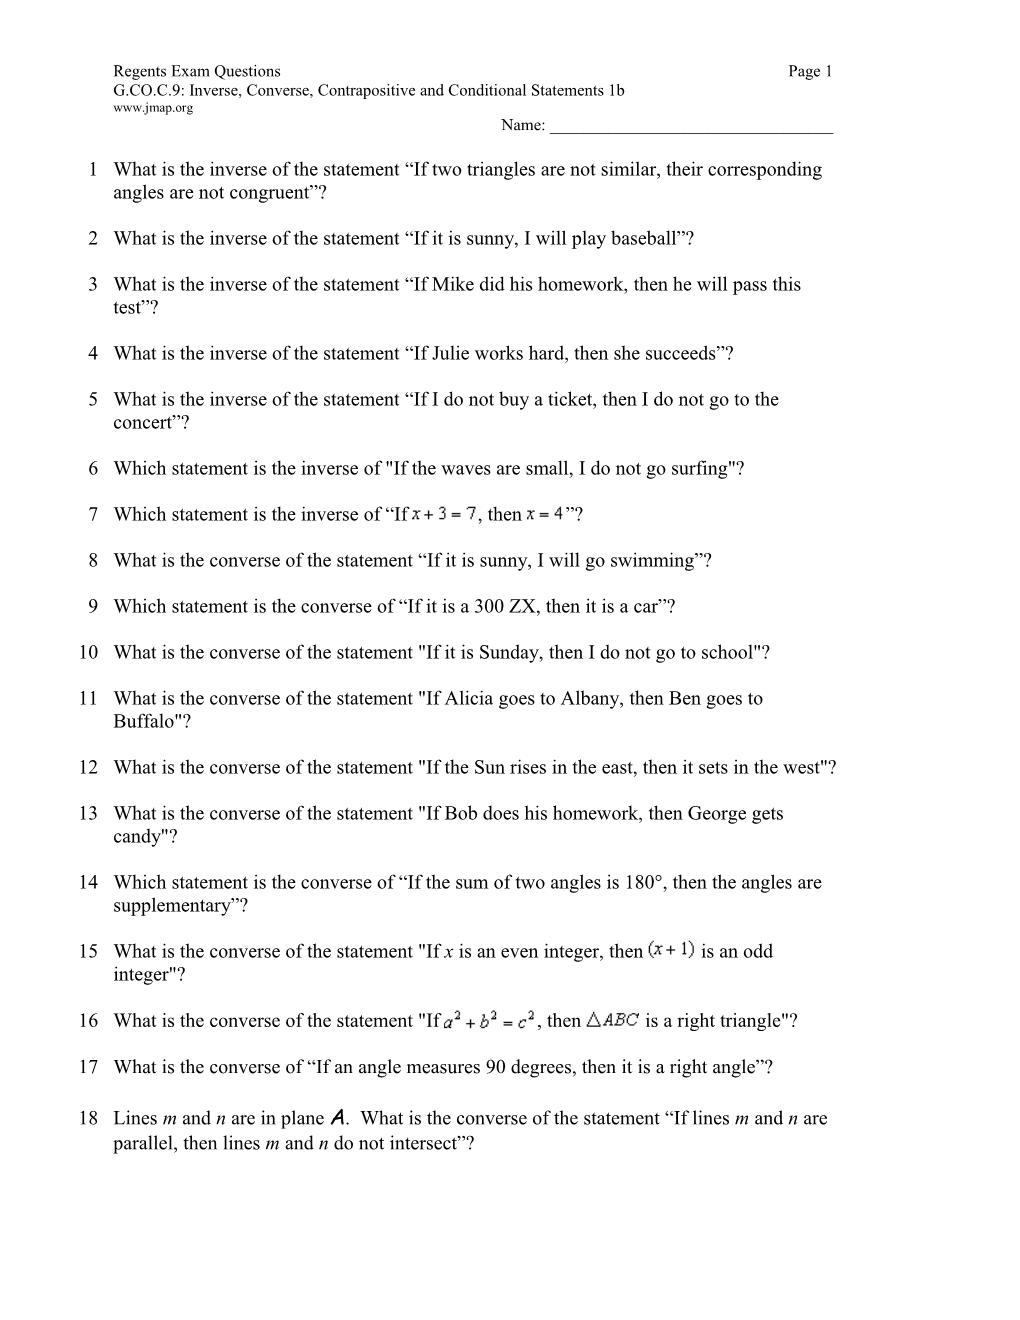 G.CO.C.9: Inverse, Converse, Contrapositive and Conditional Statements 1B